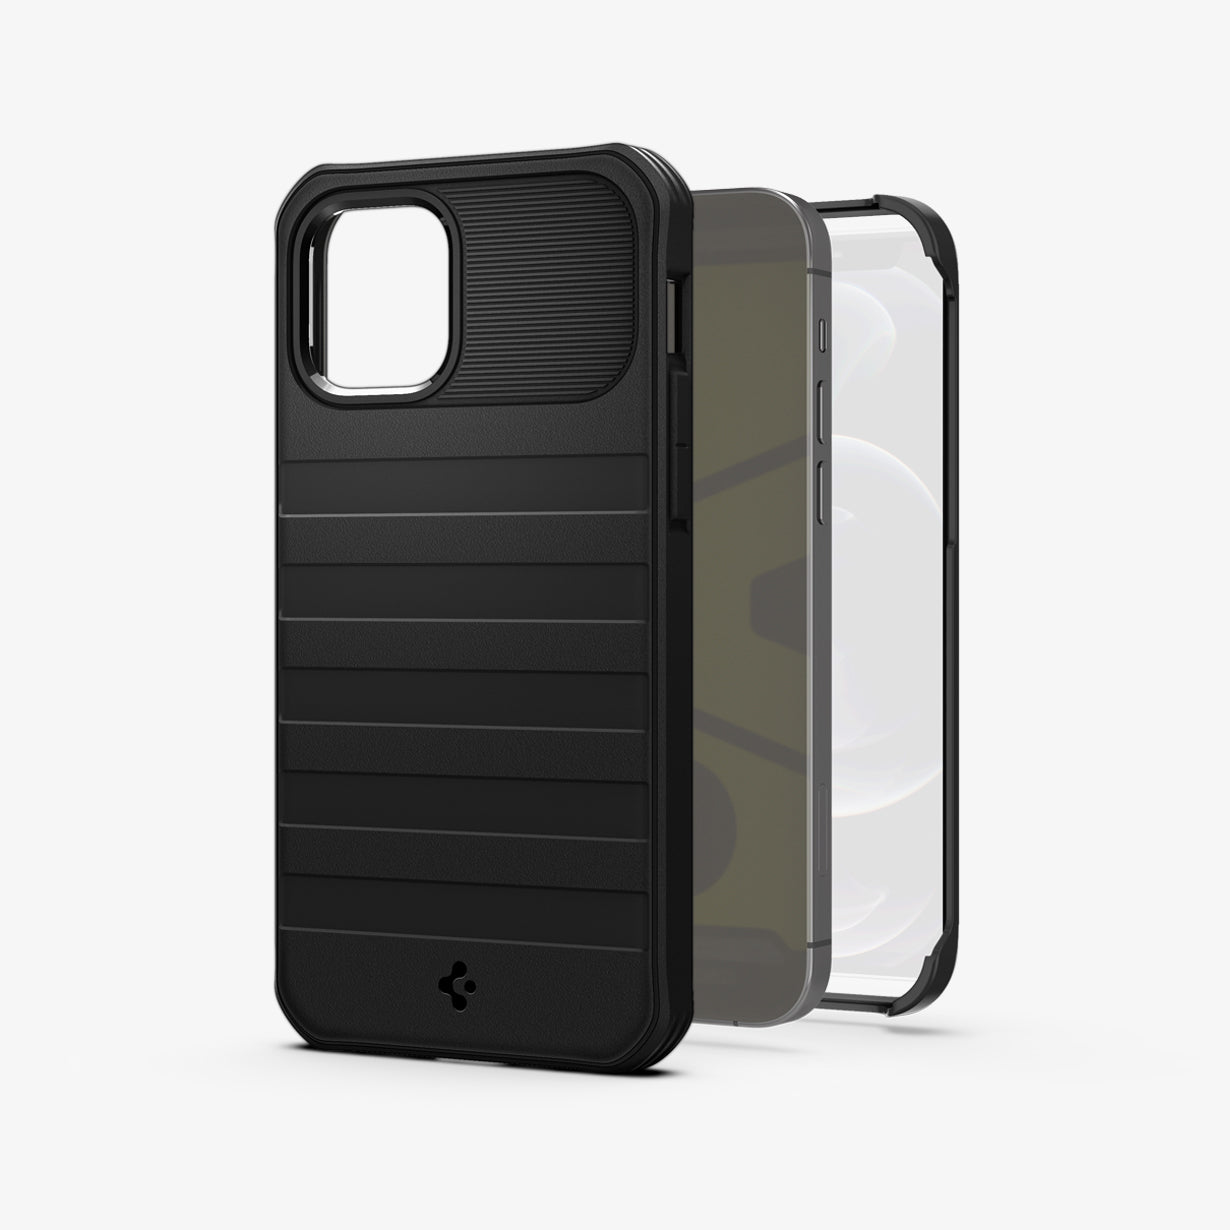 ACS02951 - iPhone 12 / iPhone 12 Pro Case Geo Armor 360 in black showing the back and partial side